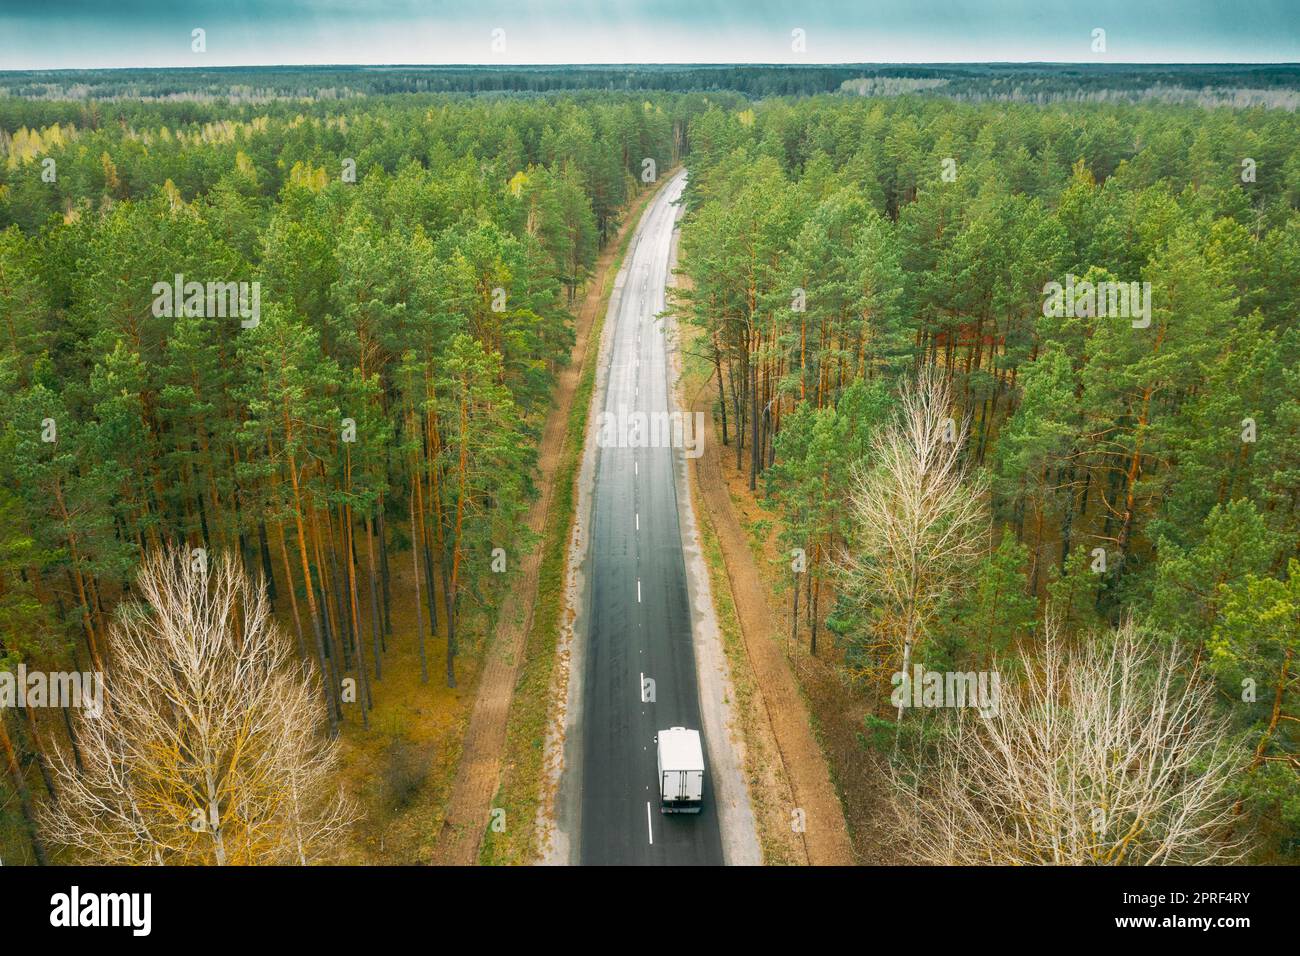 Aerial View Of Highway Road Through Spring Forest Landscape. Top View Of Truck Tractor Unit Prime Mover Traction Unit In Motion On Freeway. Business Transportation, Trucking Industry Stock Photo